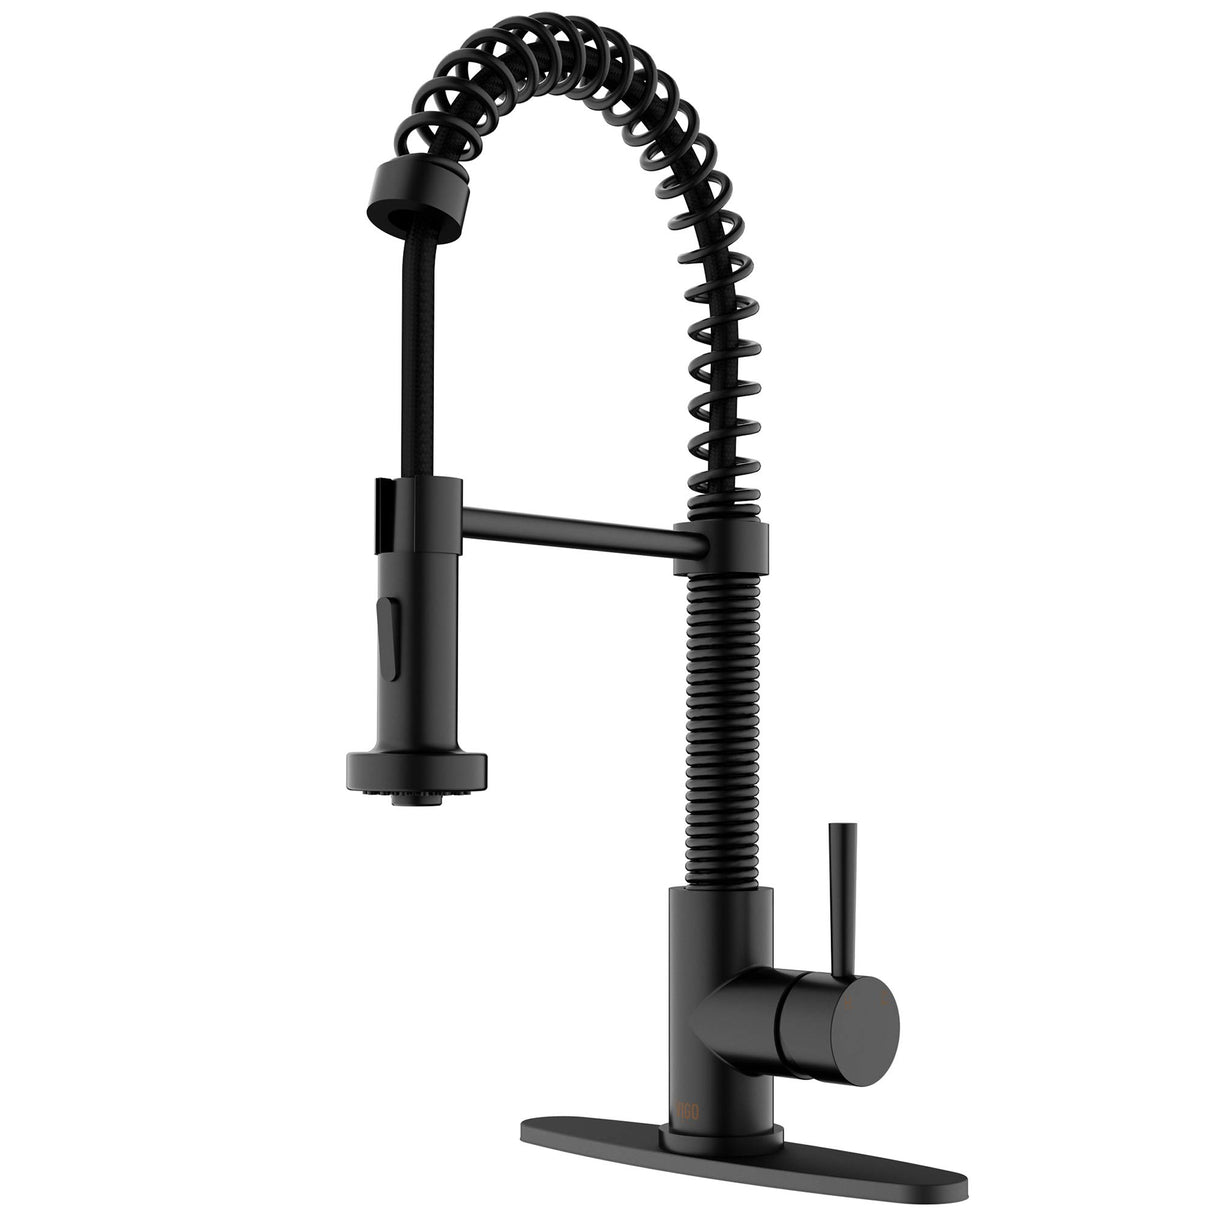 VIGO VG02001MBK1 19" H Edison Single-Handle with Pull-Down Sprayer Kitchen Faucet with Deck Plate in Matte Black